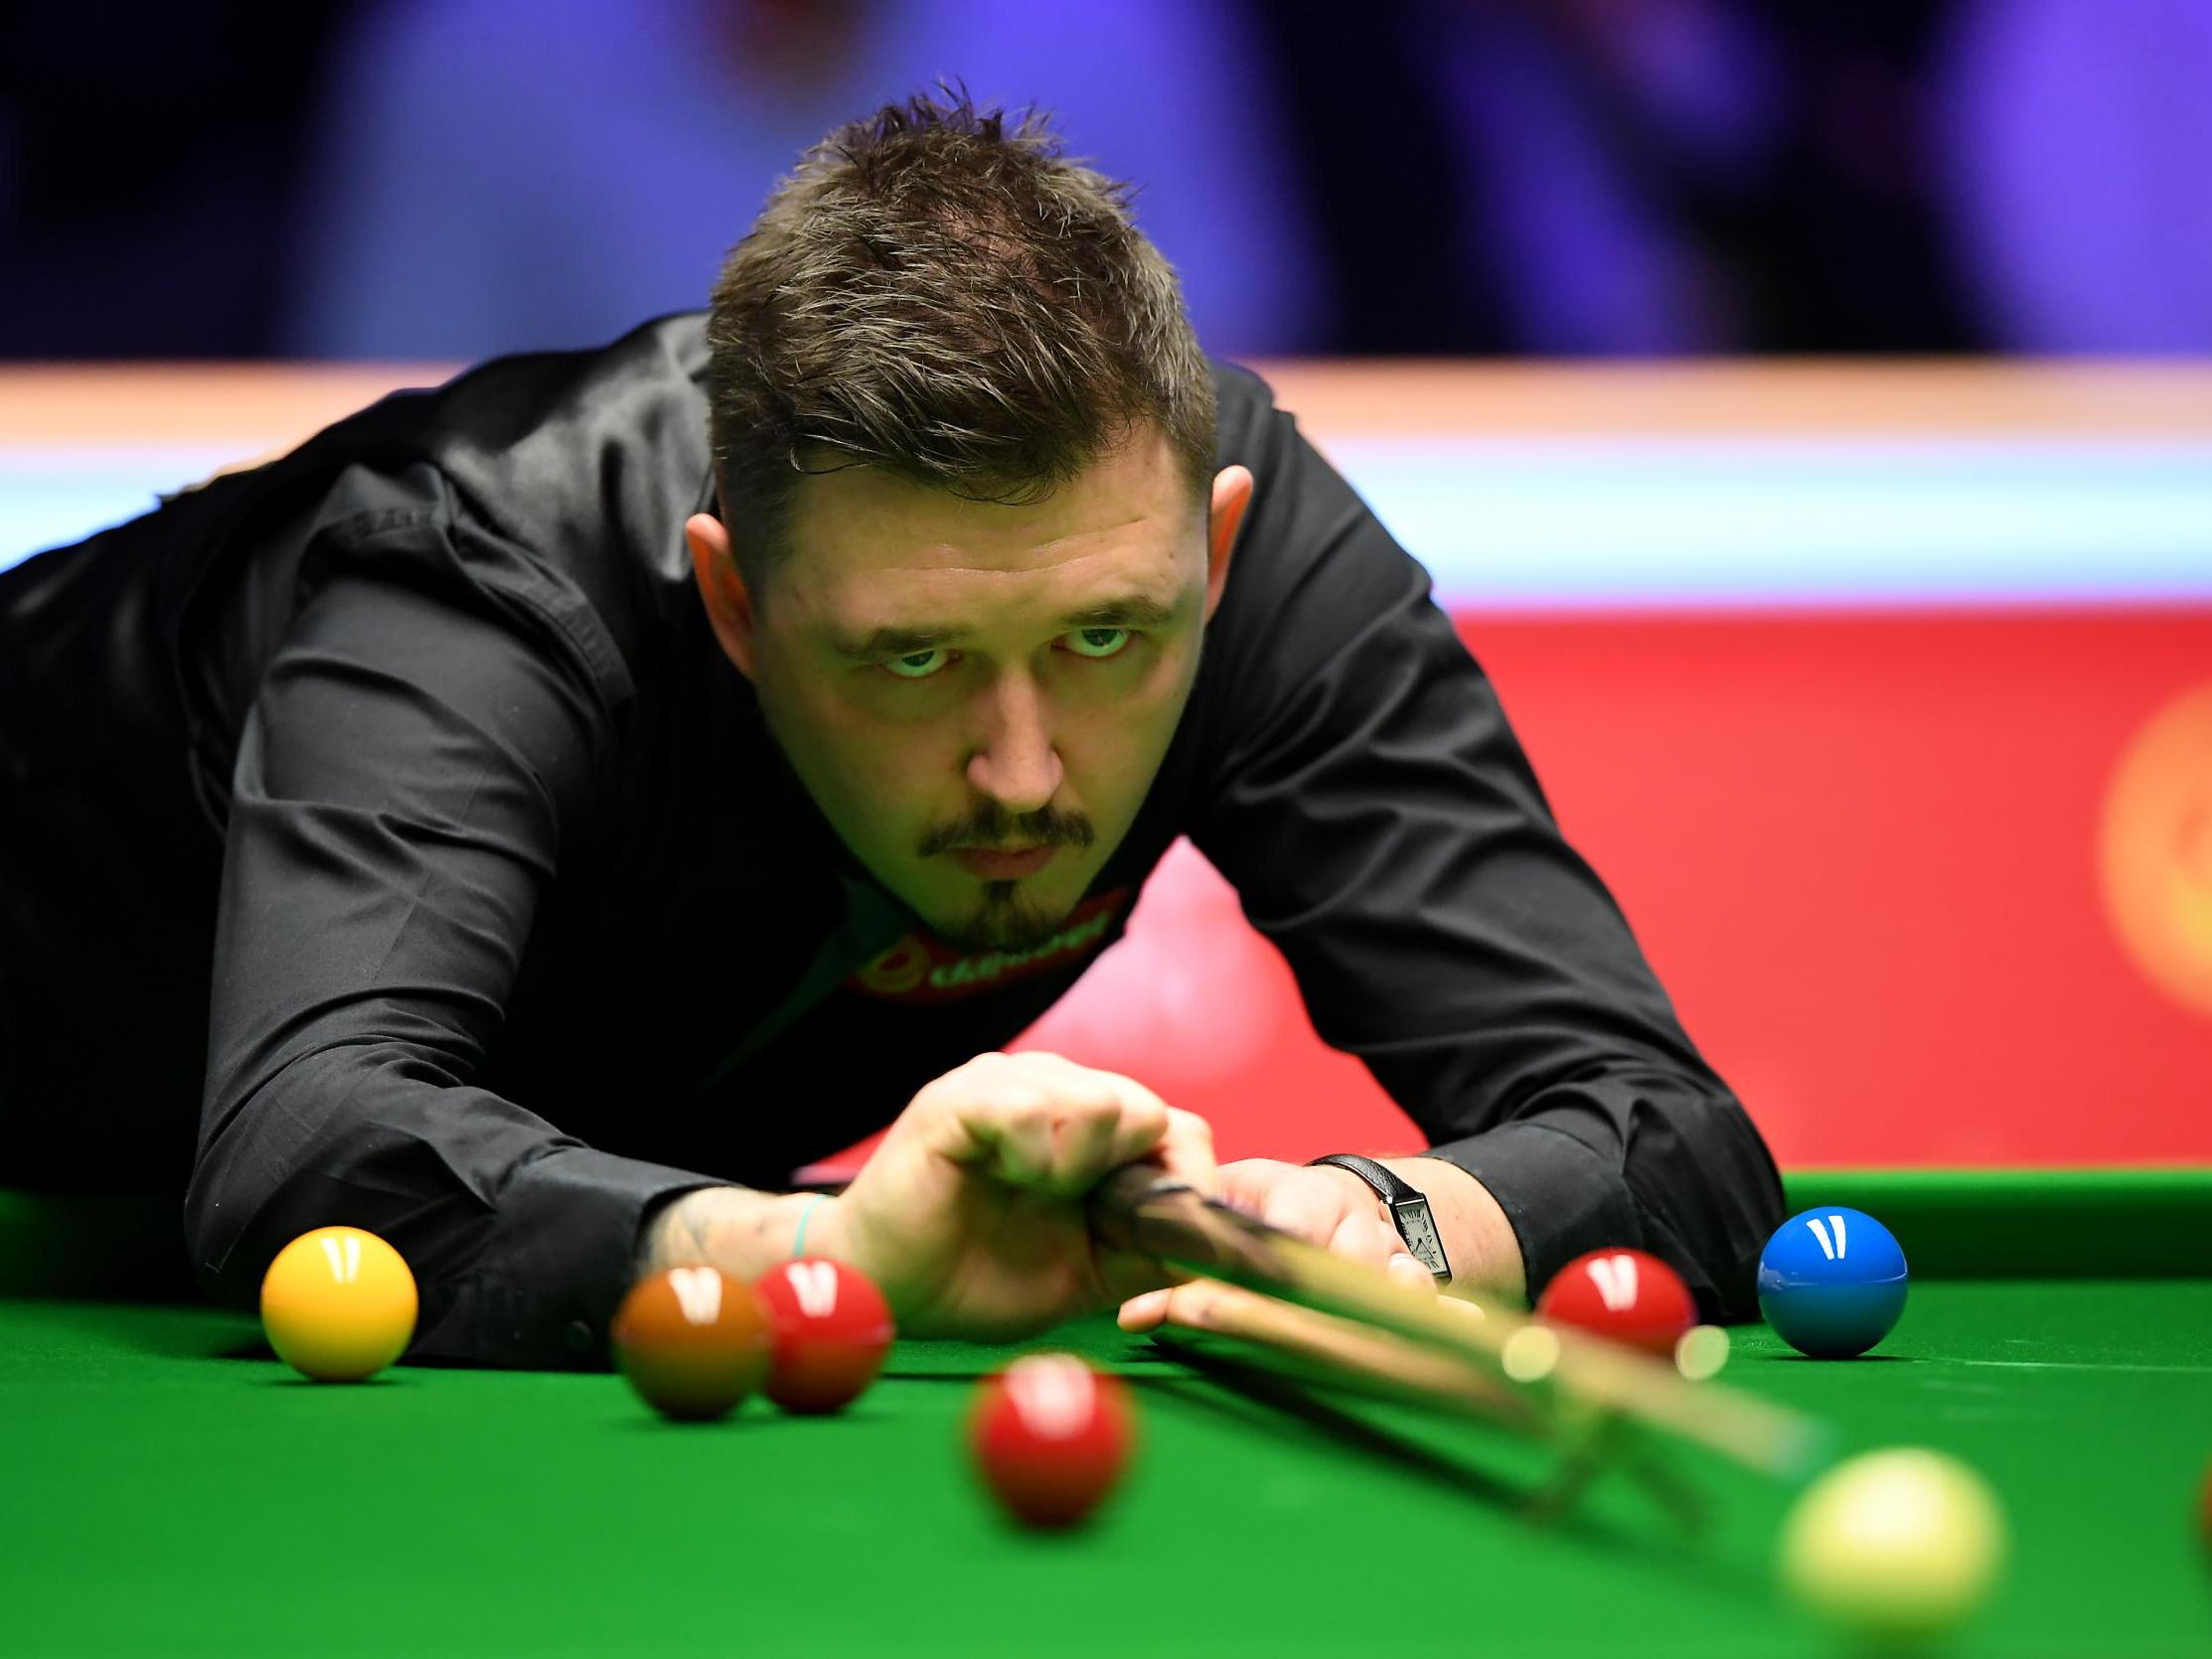 World Snooker Championship 2020 Kyren Wilson beats Anthony McGill in thriller to reach final The Independent The Independent